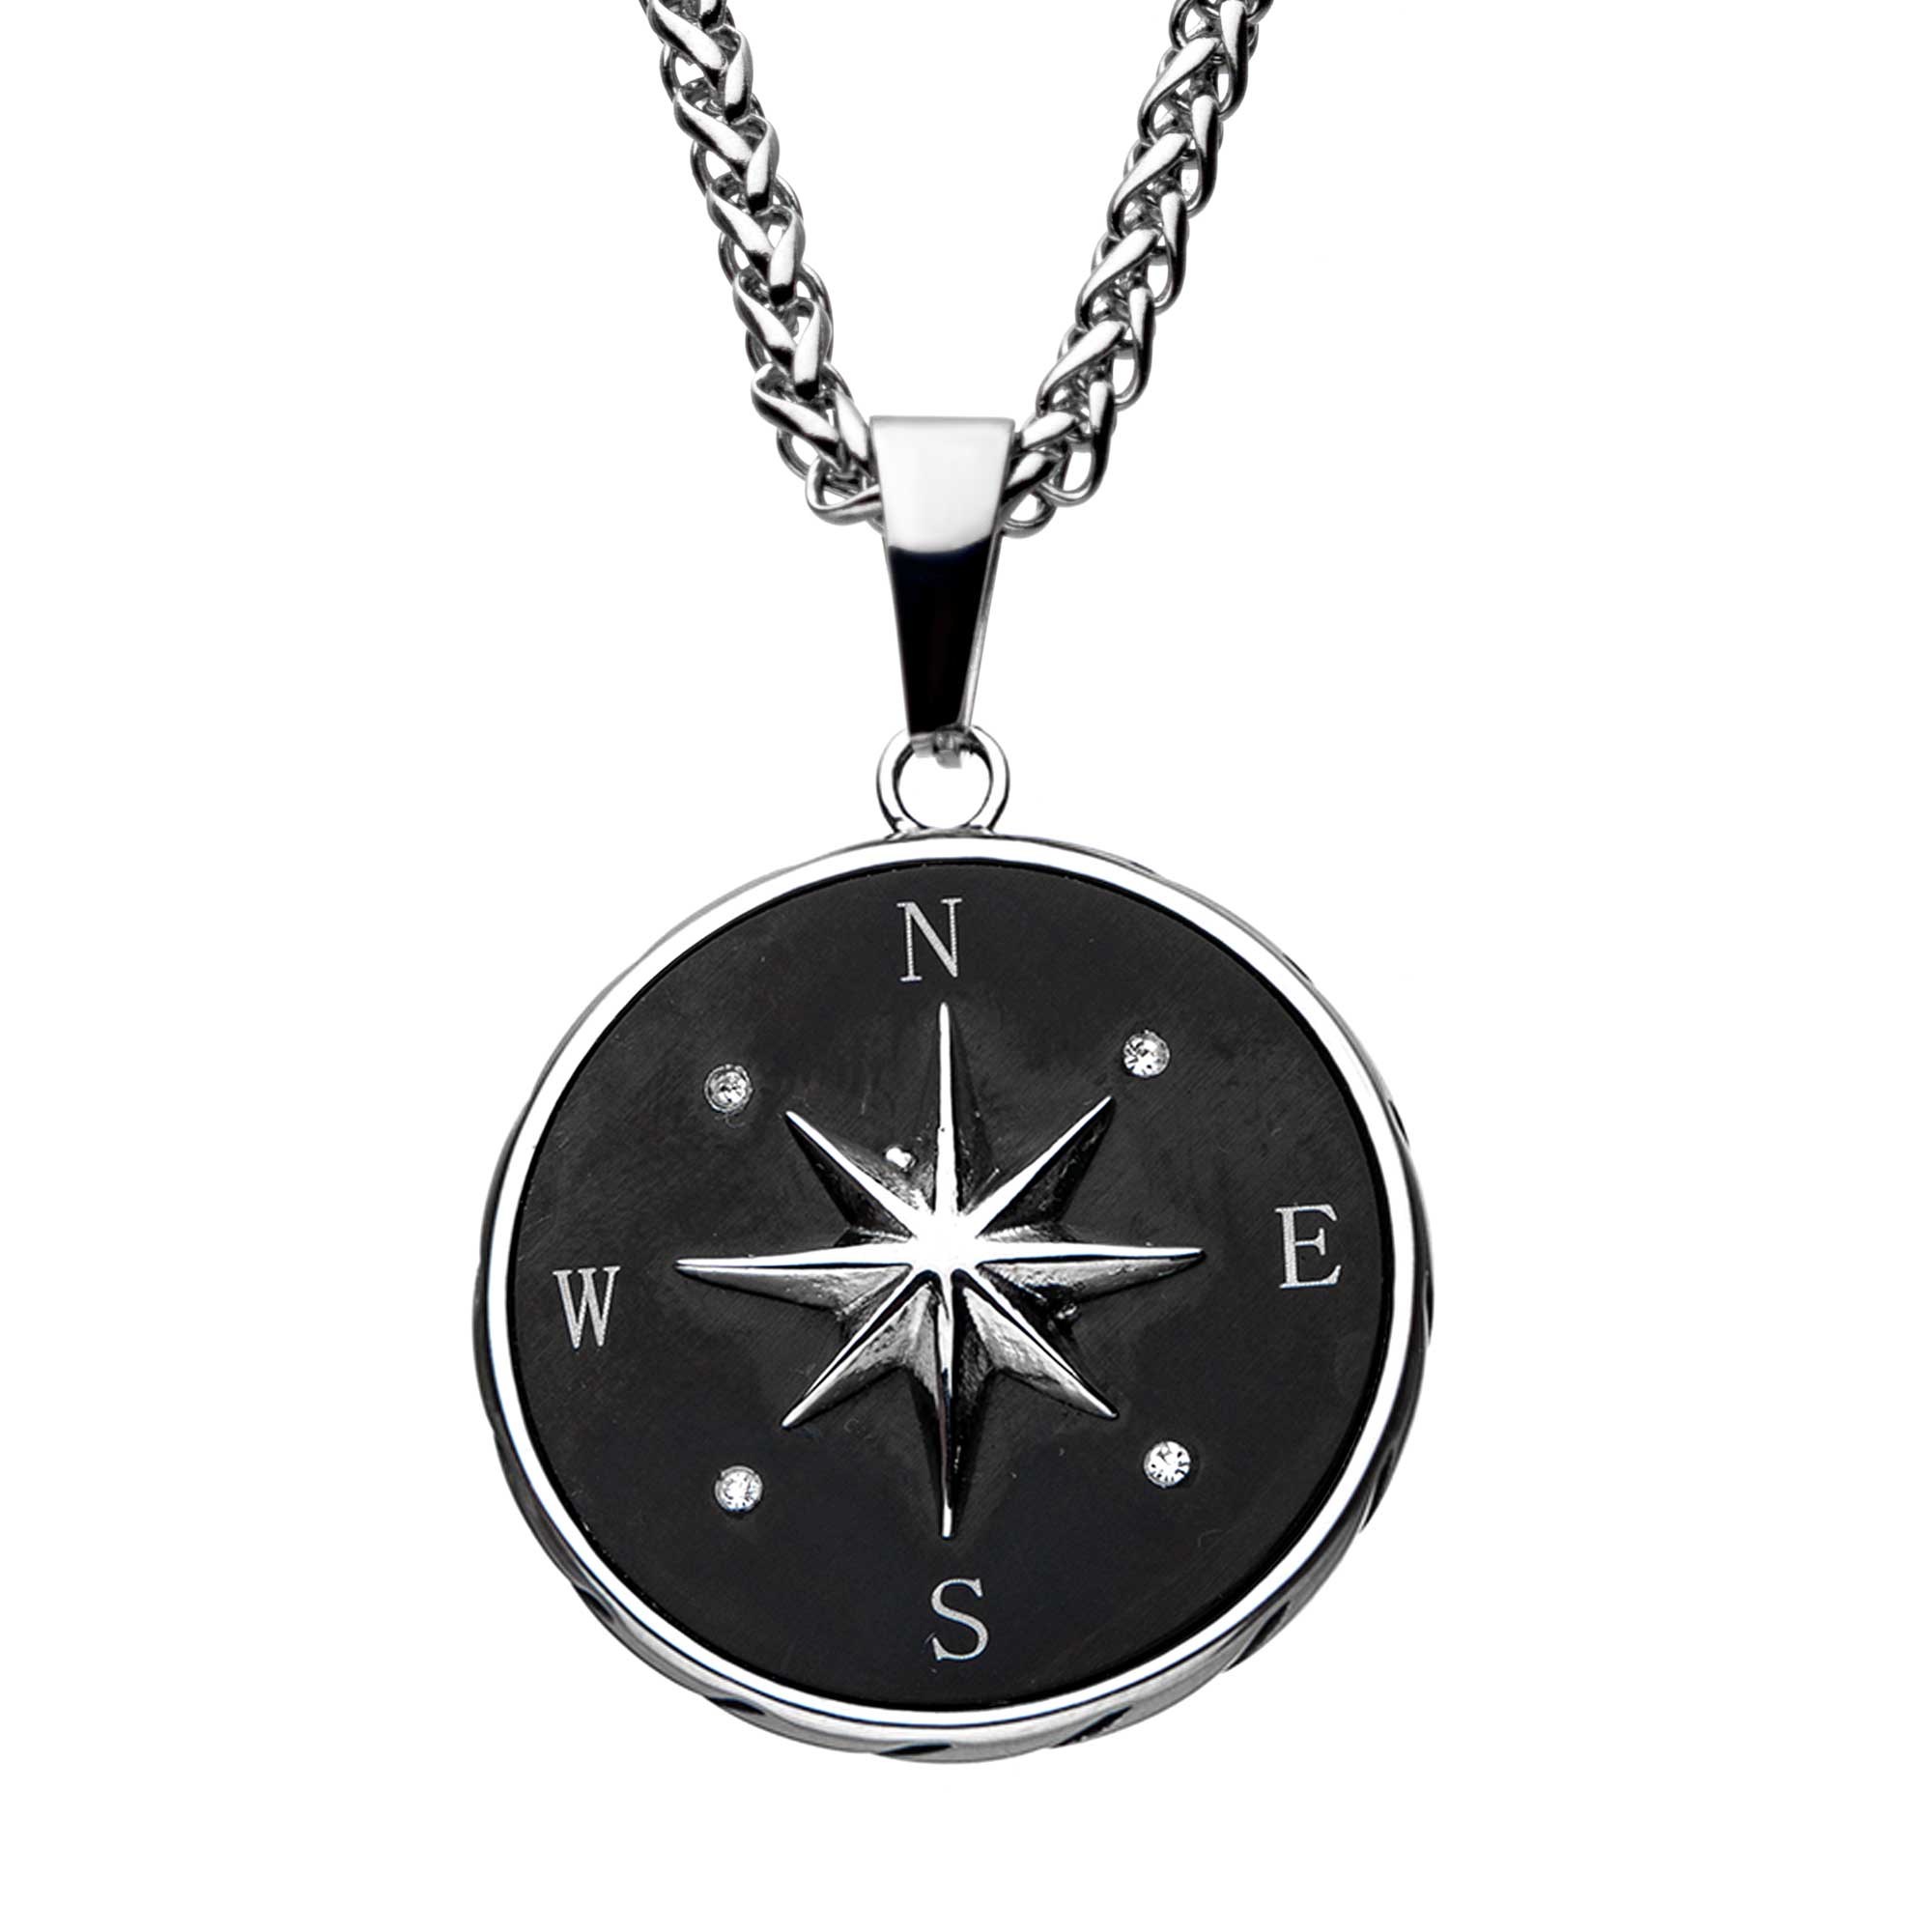 Stainless Steel and Black Plated Compass Pendant with Chain Carroll / Ochs Jewelers Monroe, MI